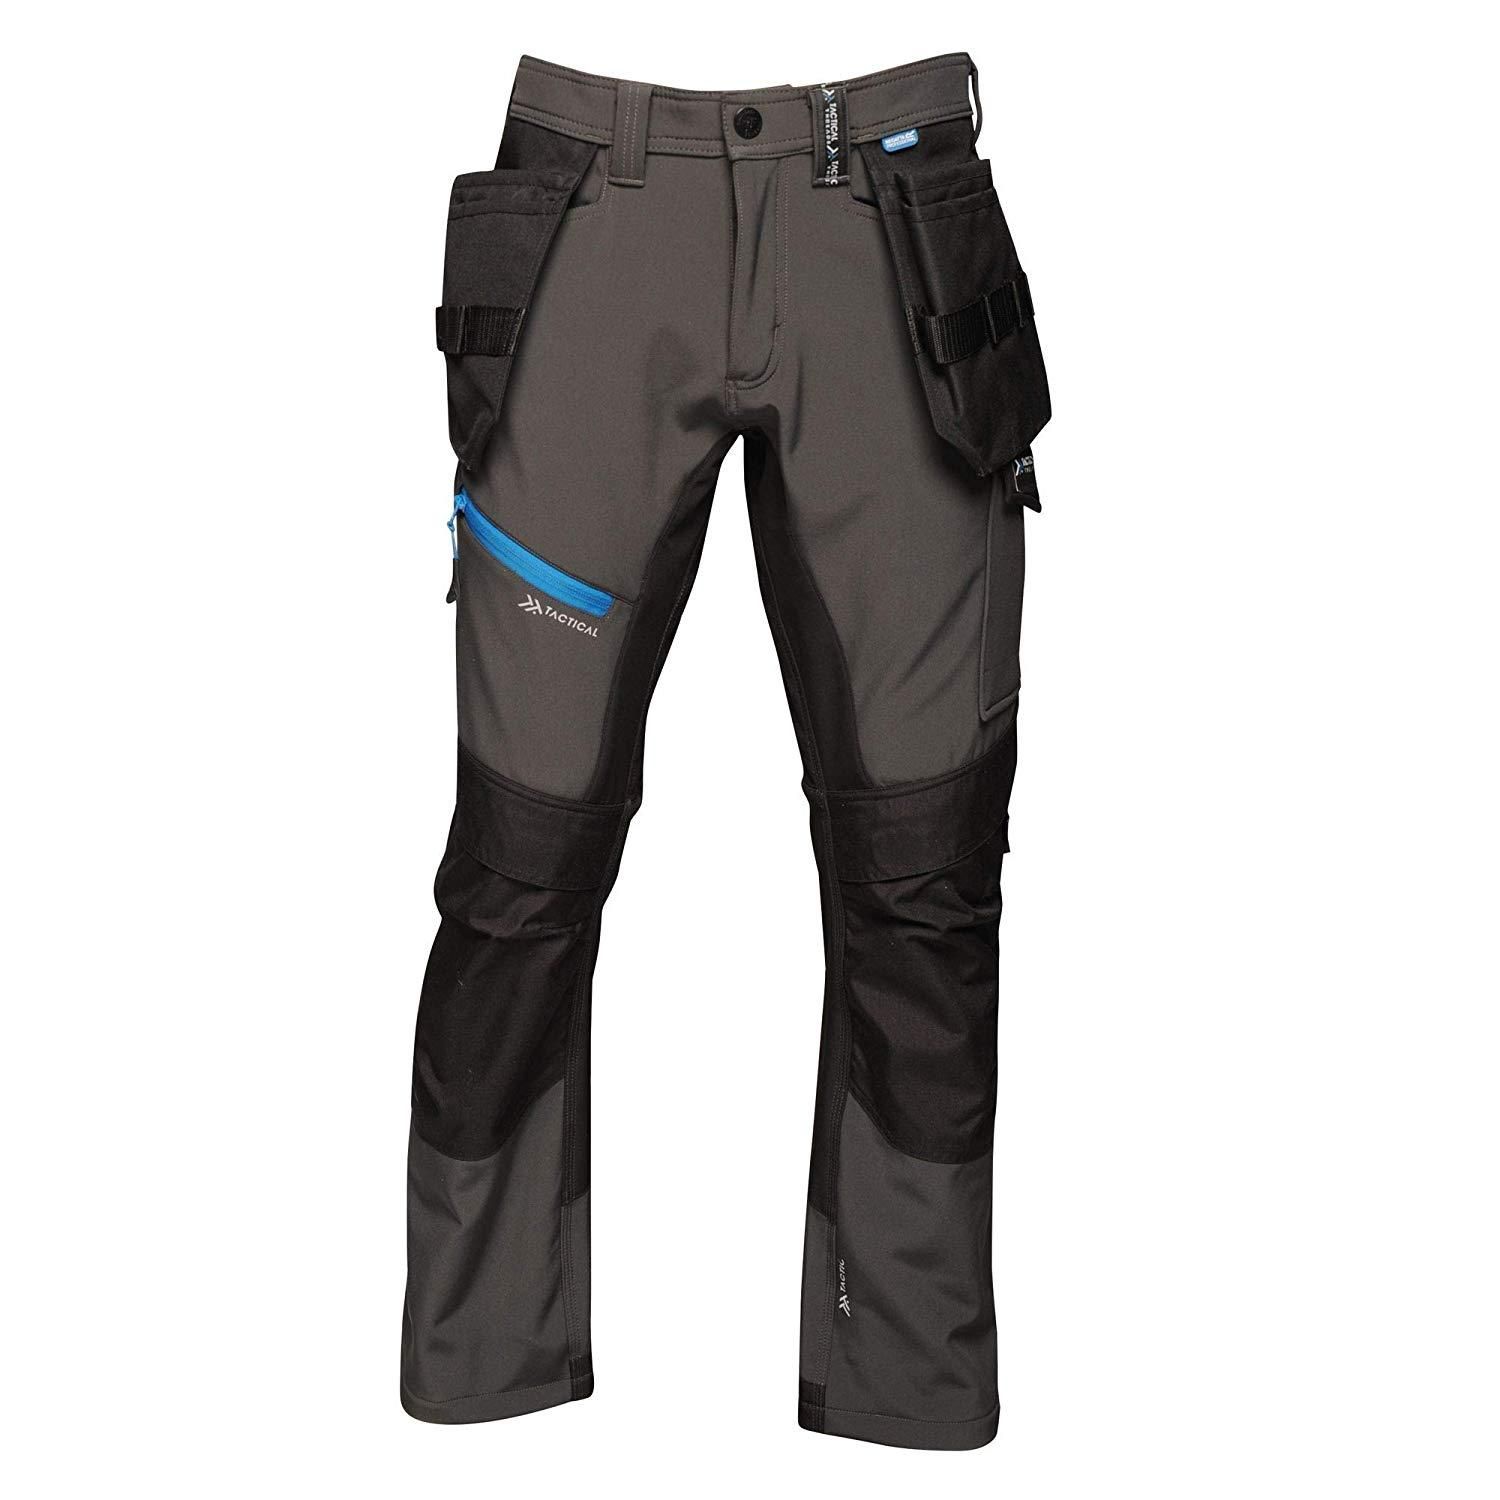 Mens work trousers with multiple compartments. Features 2 front pockets, 1 x zipped security pocket, 2 rear pockets, 1 zipped back pocket and 1 cargo leg pocket. Shank button at waist for extra strength. Crotch gusset for greater movement. Belt loops, Slim fit design, reinforced hem overlays.